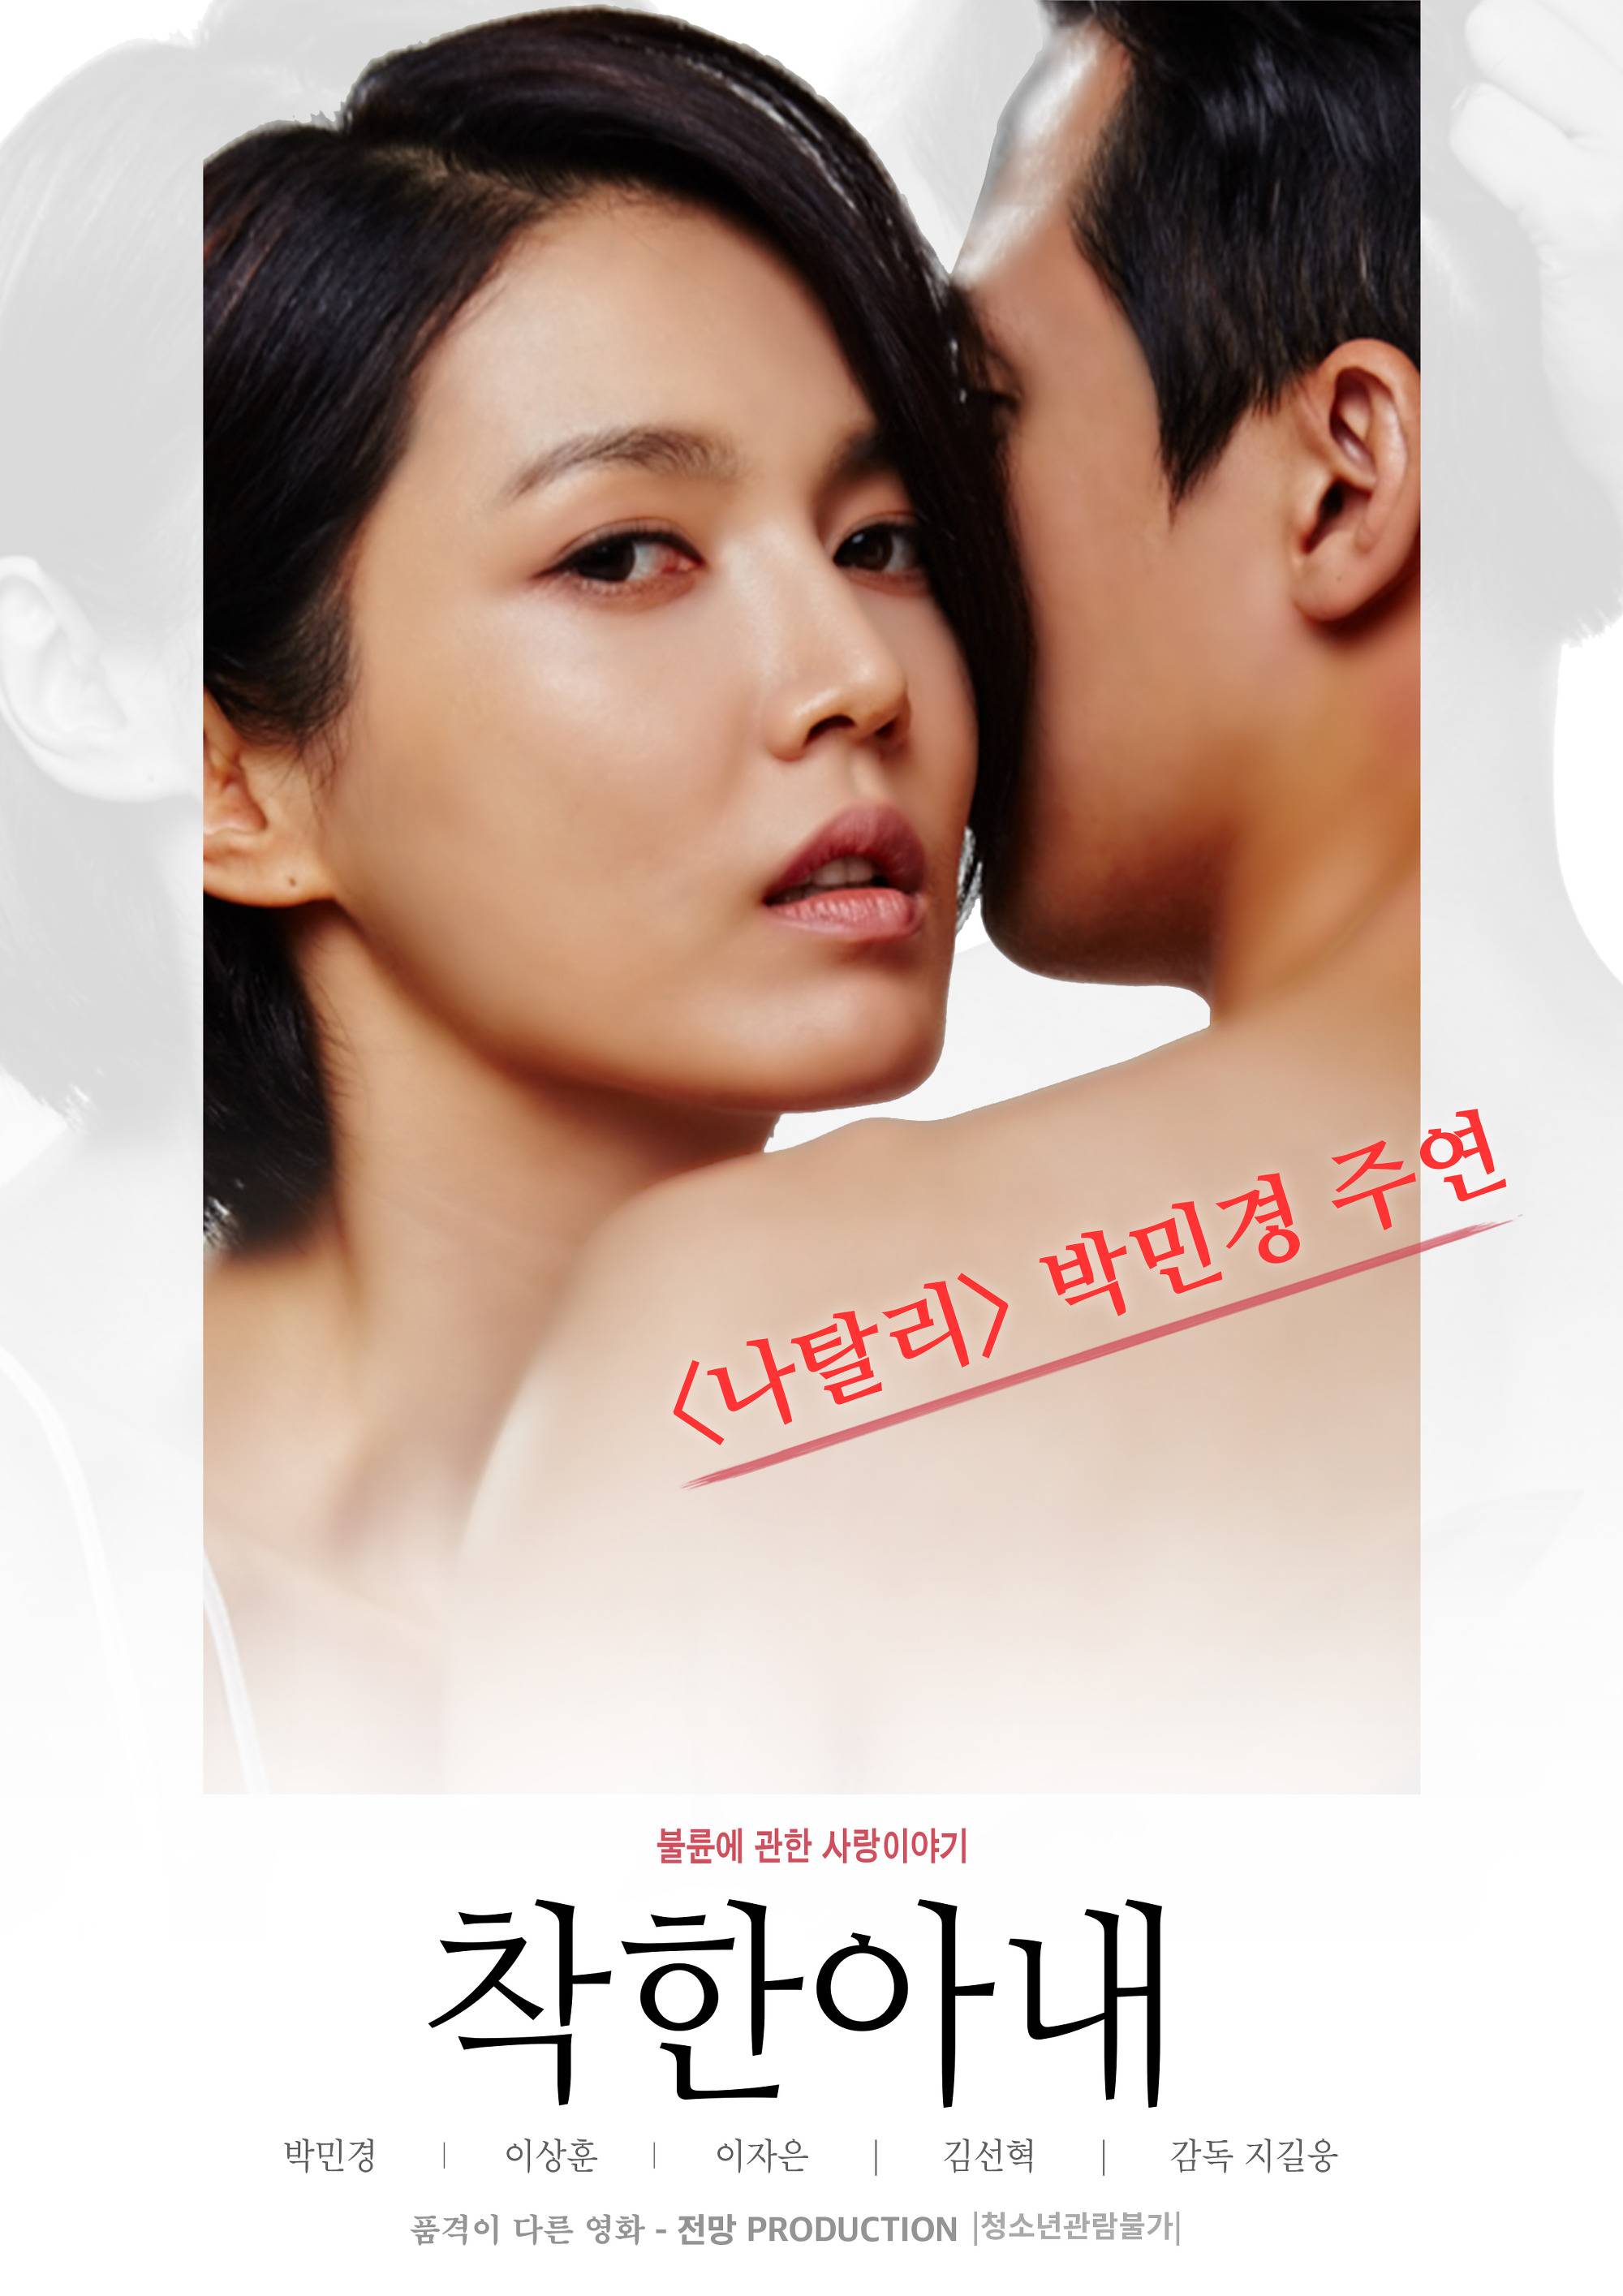 Korean movie The Kind Wife pic